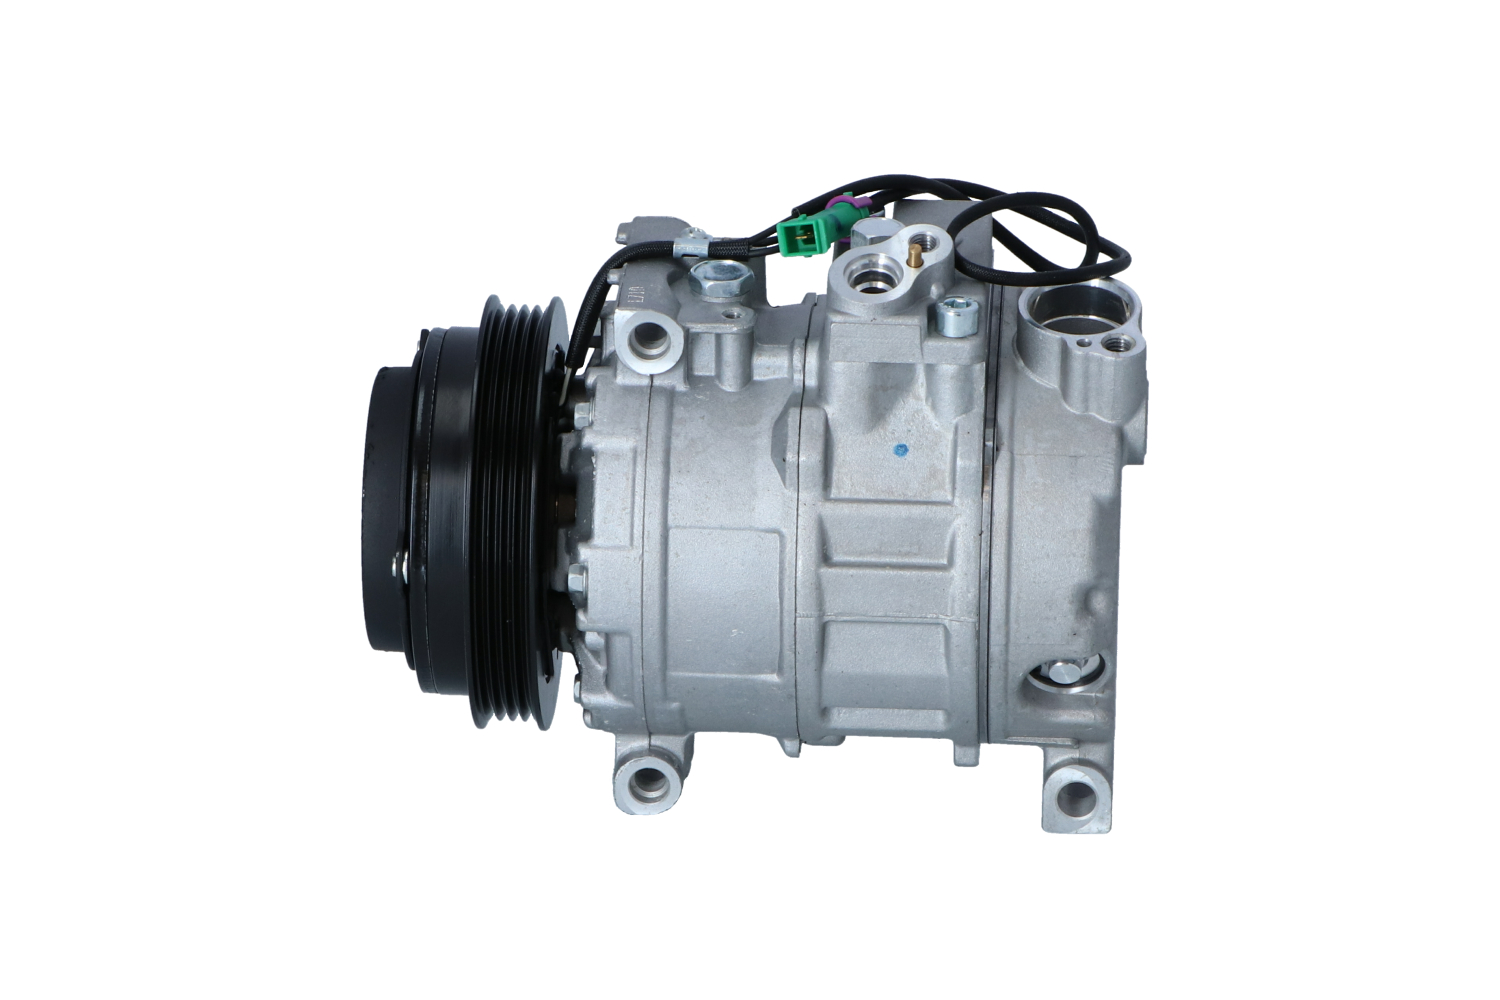 NRF 32167 Air conditioning compressor 7SBU16C, 12V, PAG 46, with PAG compressor oil, with seal ring